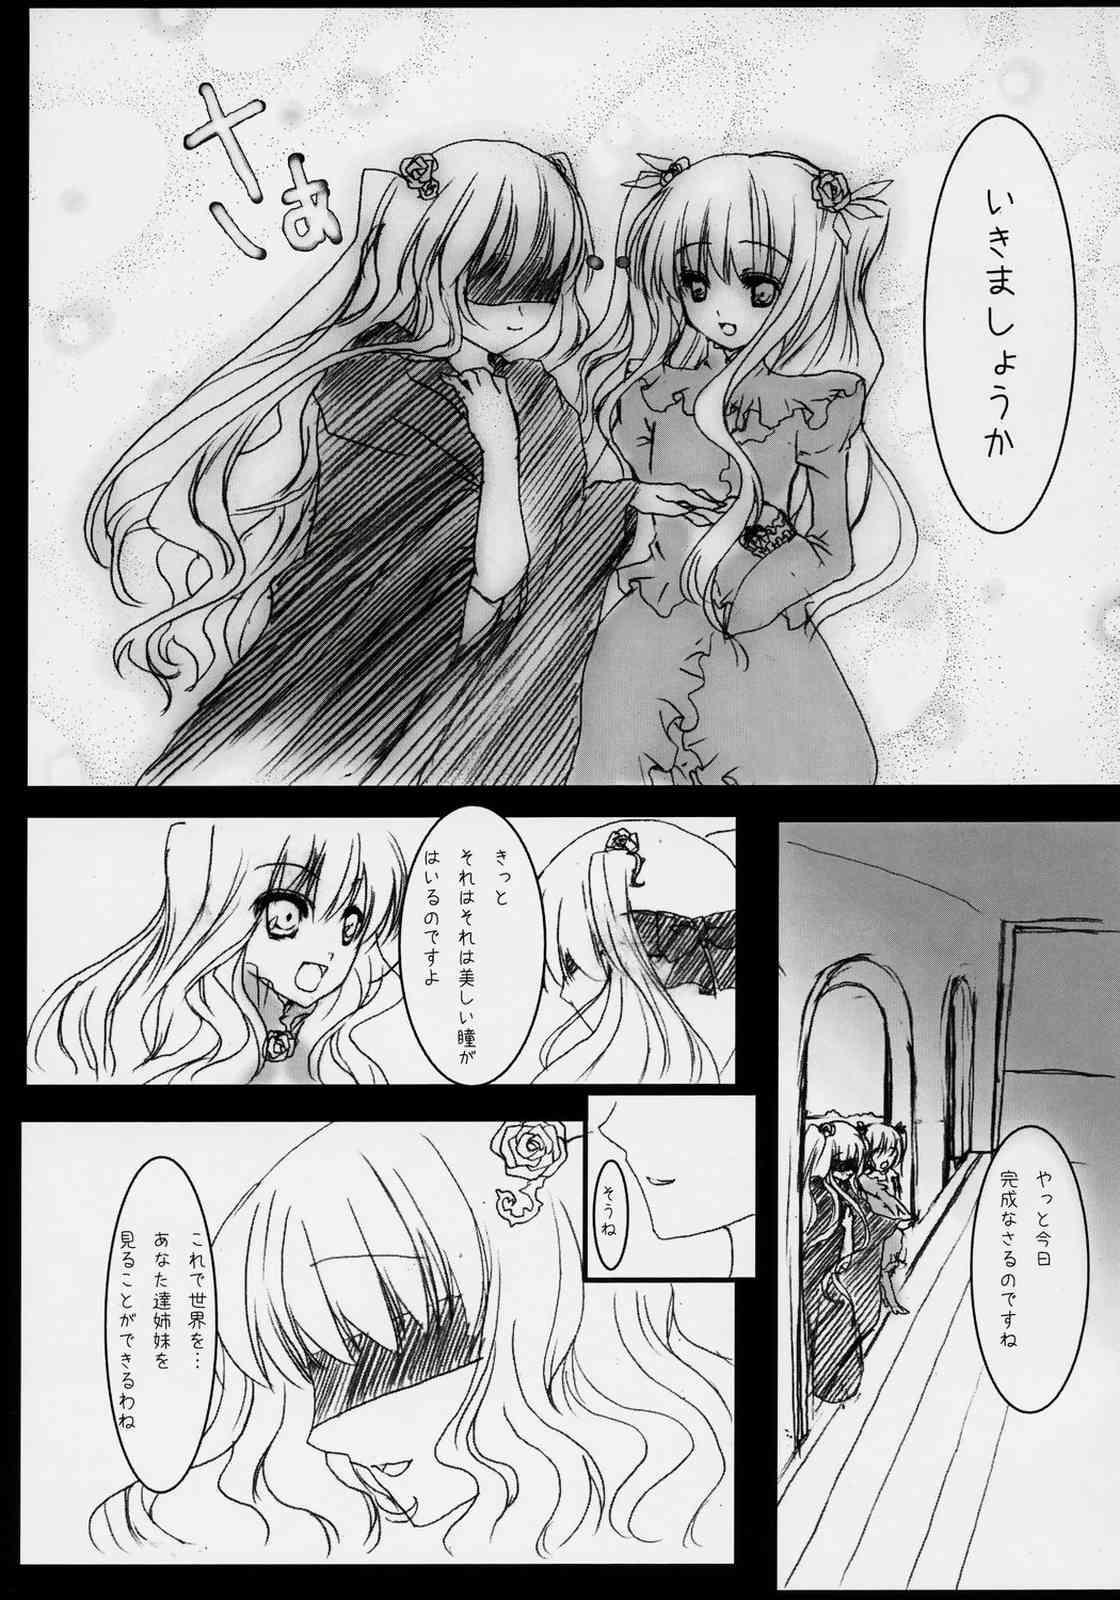 Cutie Dependence - Rozen maiden Butthole - Page 8